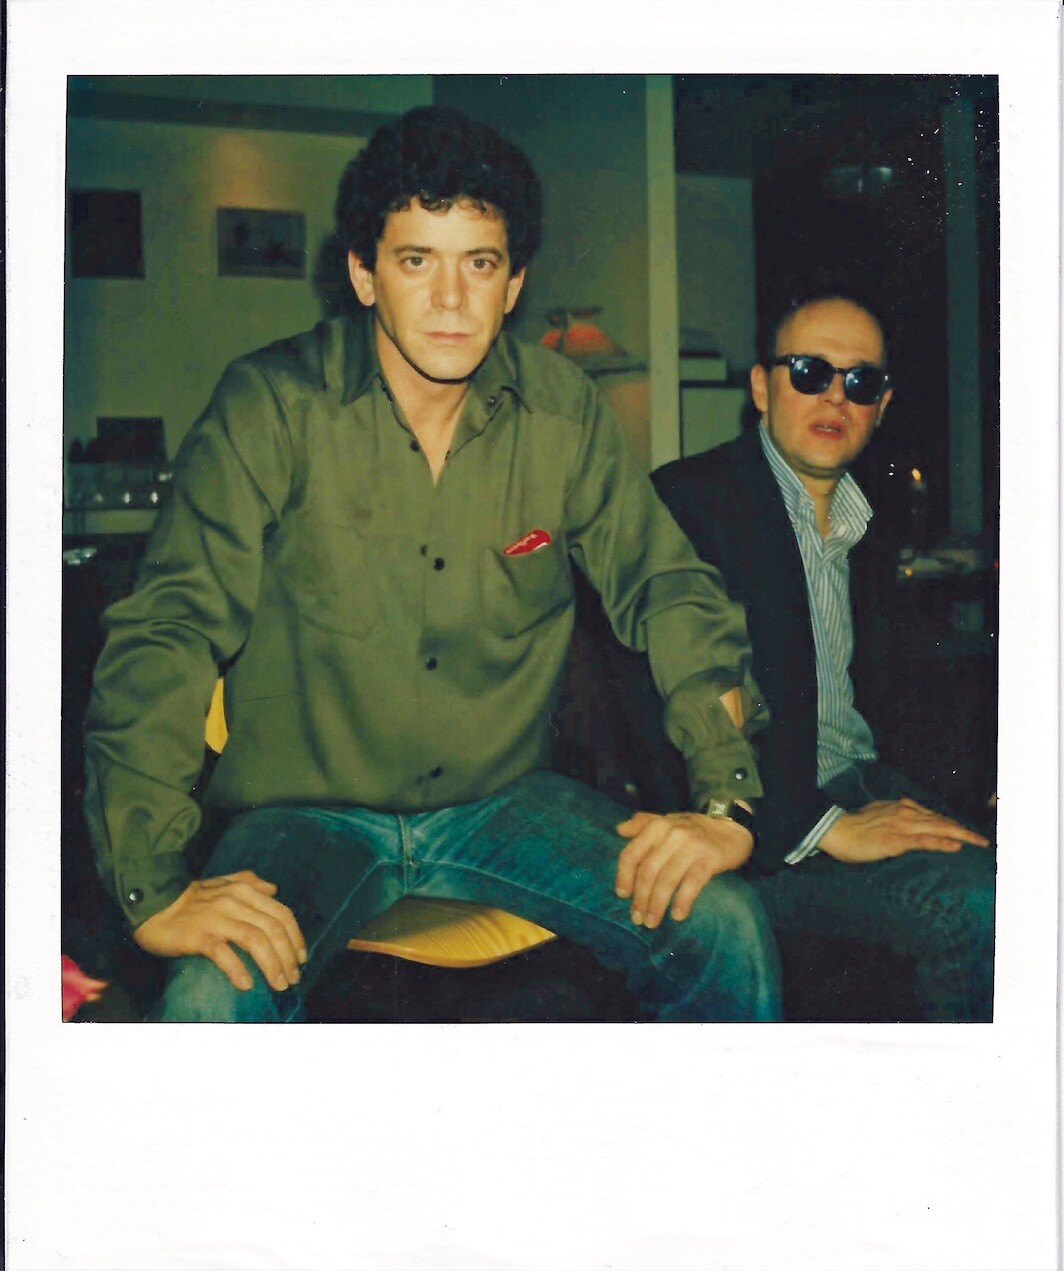 Lou Reed and Robert Quine, ca. 1981. Courtesy: Sylvia Reed